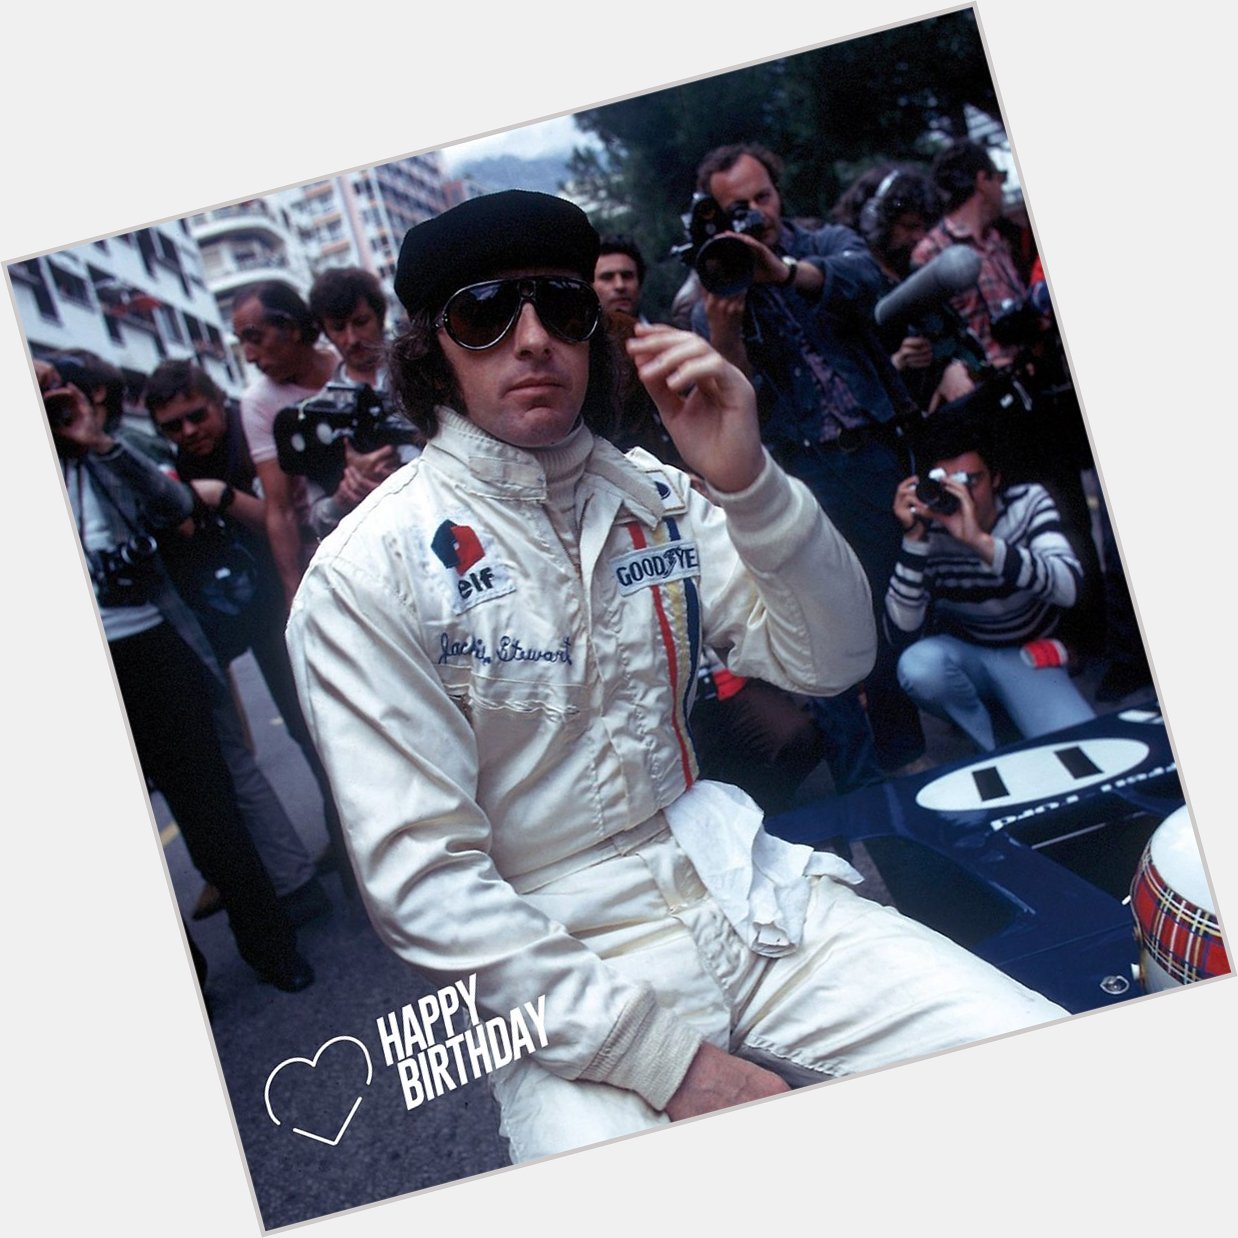 Join us and wish happy birthday to F1 legend and former ELF champion Jackie Stewart. 